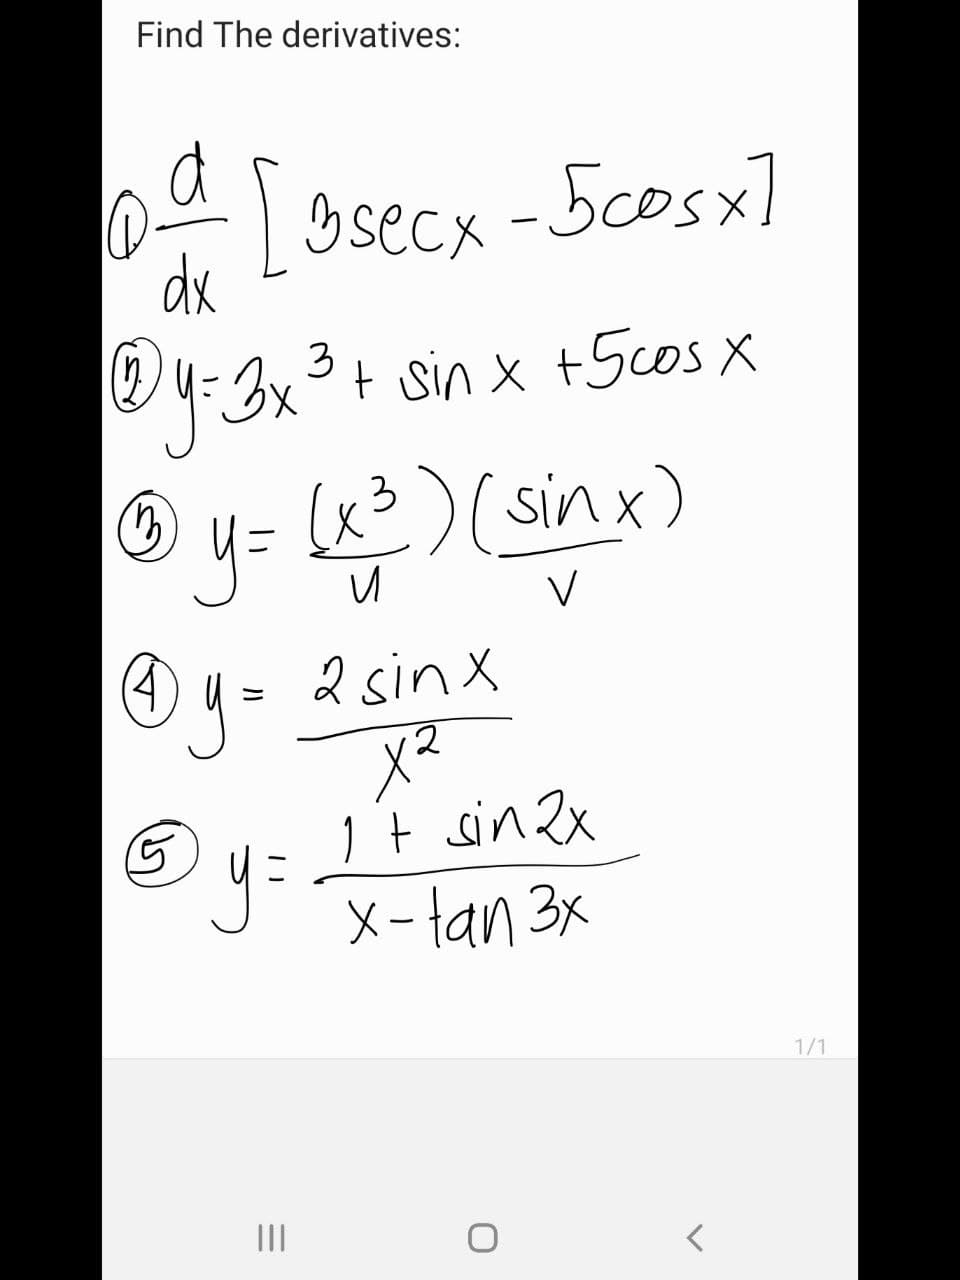 Find The derivatives:
04 Losecx - 5cosx]
dx
@ y = 3x ³ + sin x + 5 cos
X
Ⓒ y = (x ² ) (sin x)
и
V
@y=
2sinx
x²
it sin 2x
5
3 y = -√x-tan 3x
|||
<
1/1